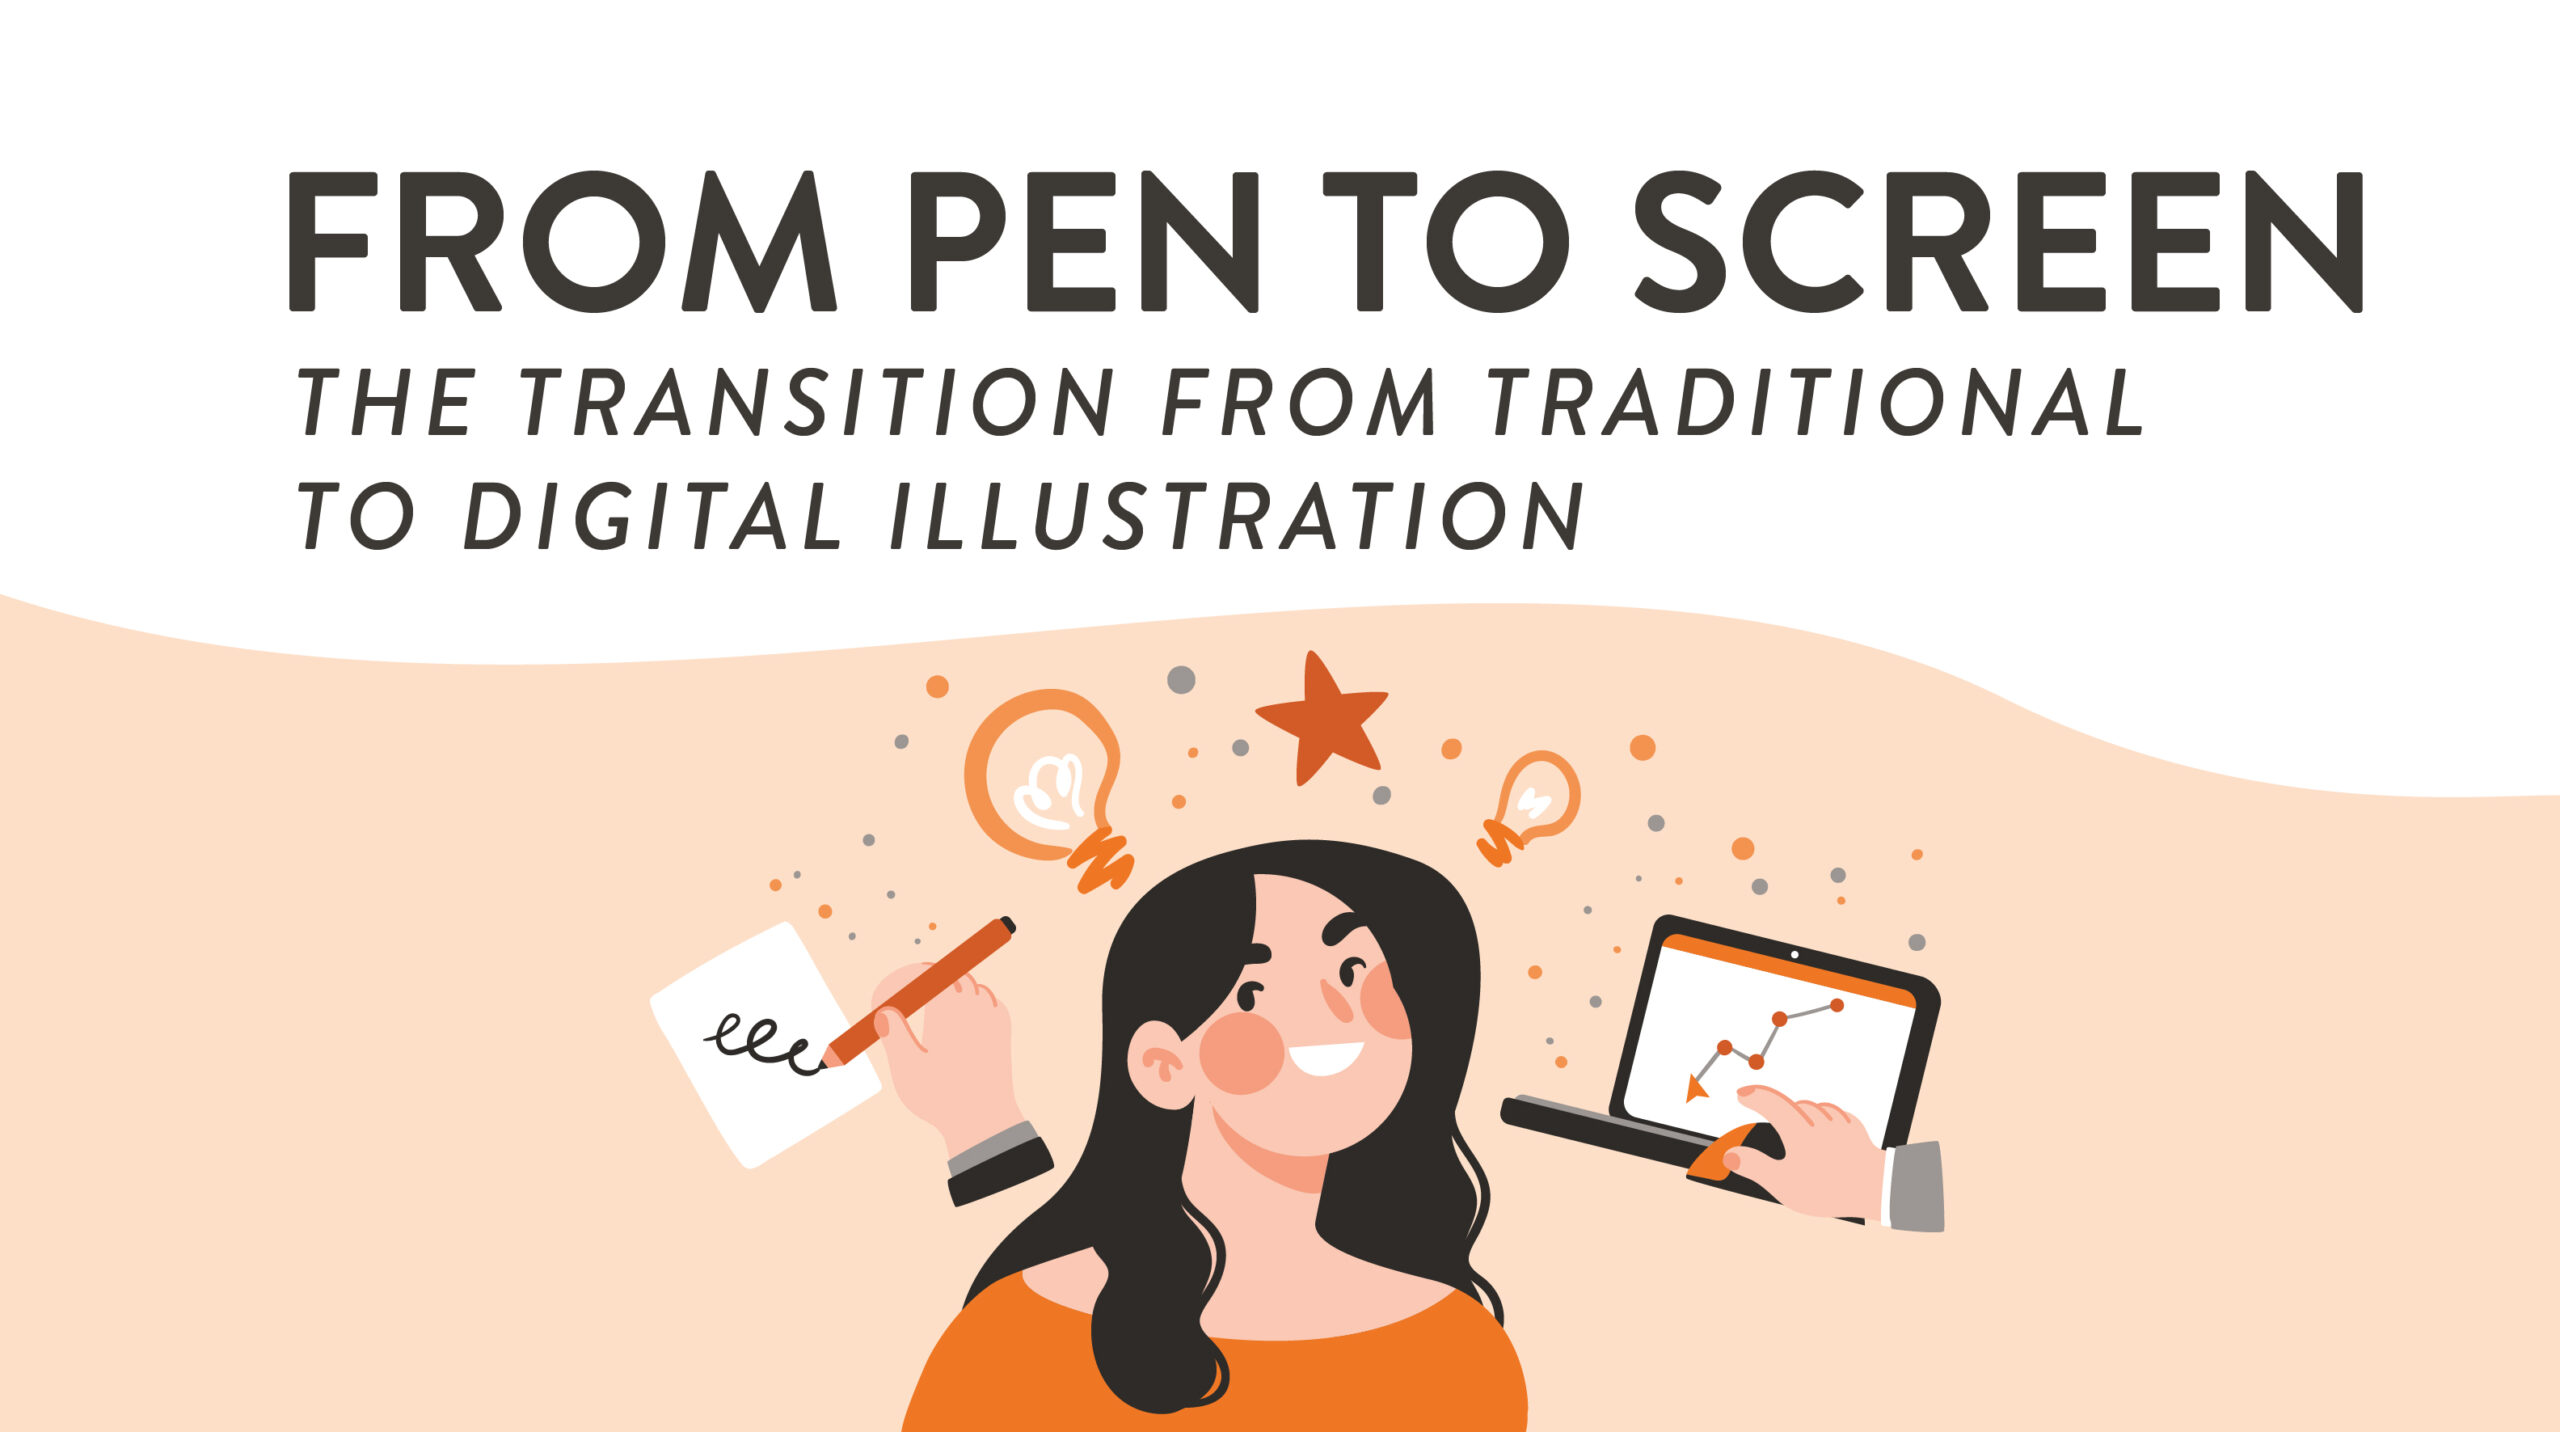 From Pen to Screen: The Transition from Traditional to Digital Illustration